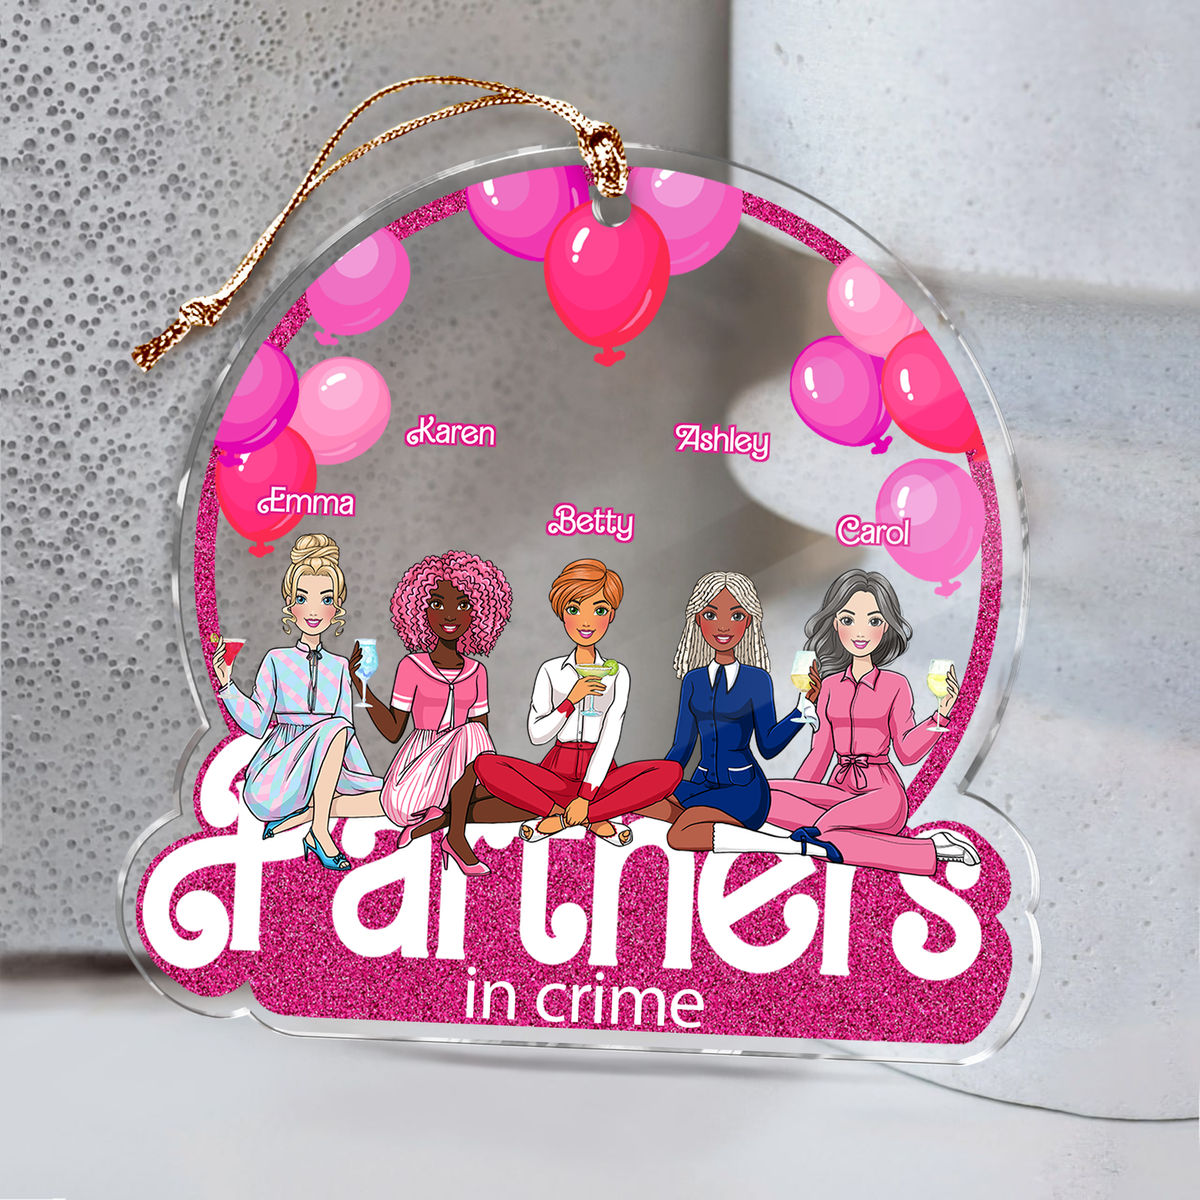 Personalized Pink Acrylic Friends Ornament - Partners In Crime - Playful Friendship Keepsake (v2)_1